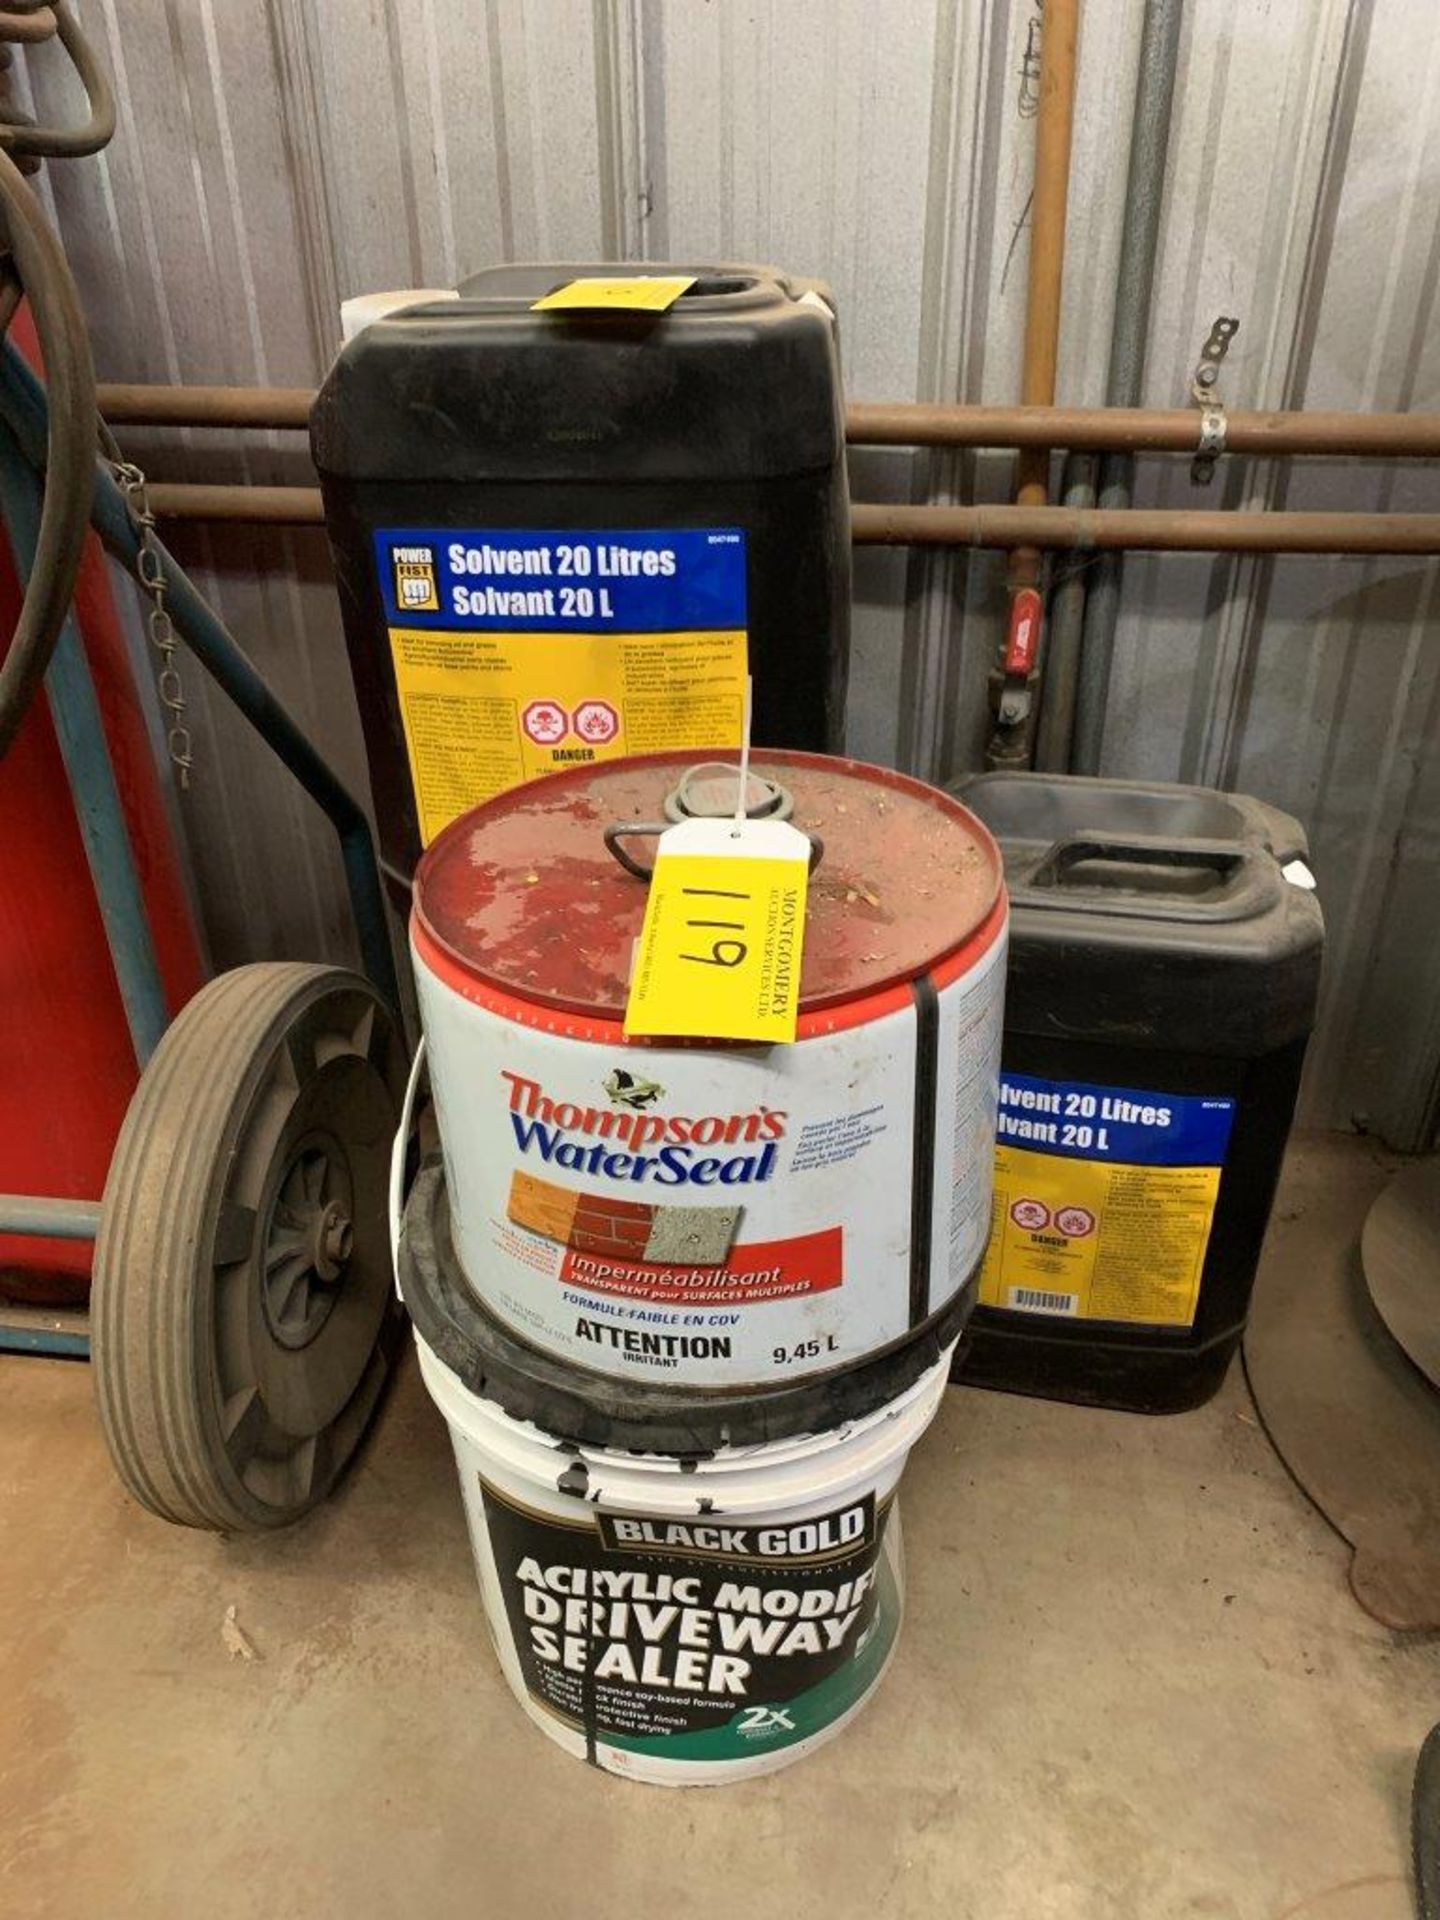 POWER FIST SOLVENT, PARTS CLEANING SOLVENT, THOMPSONS WATER SEAL, DRIVEWAY SEALANT, ETC.